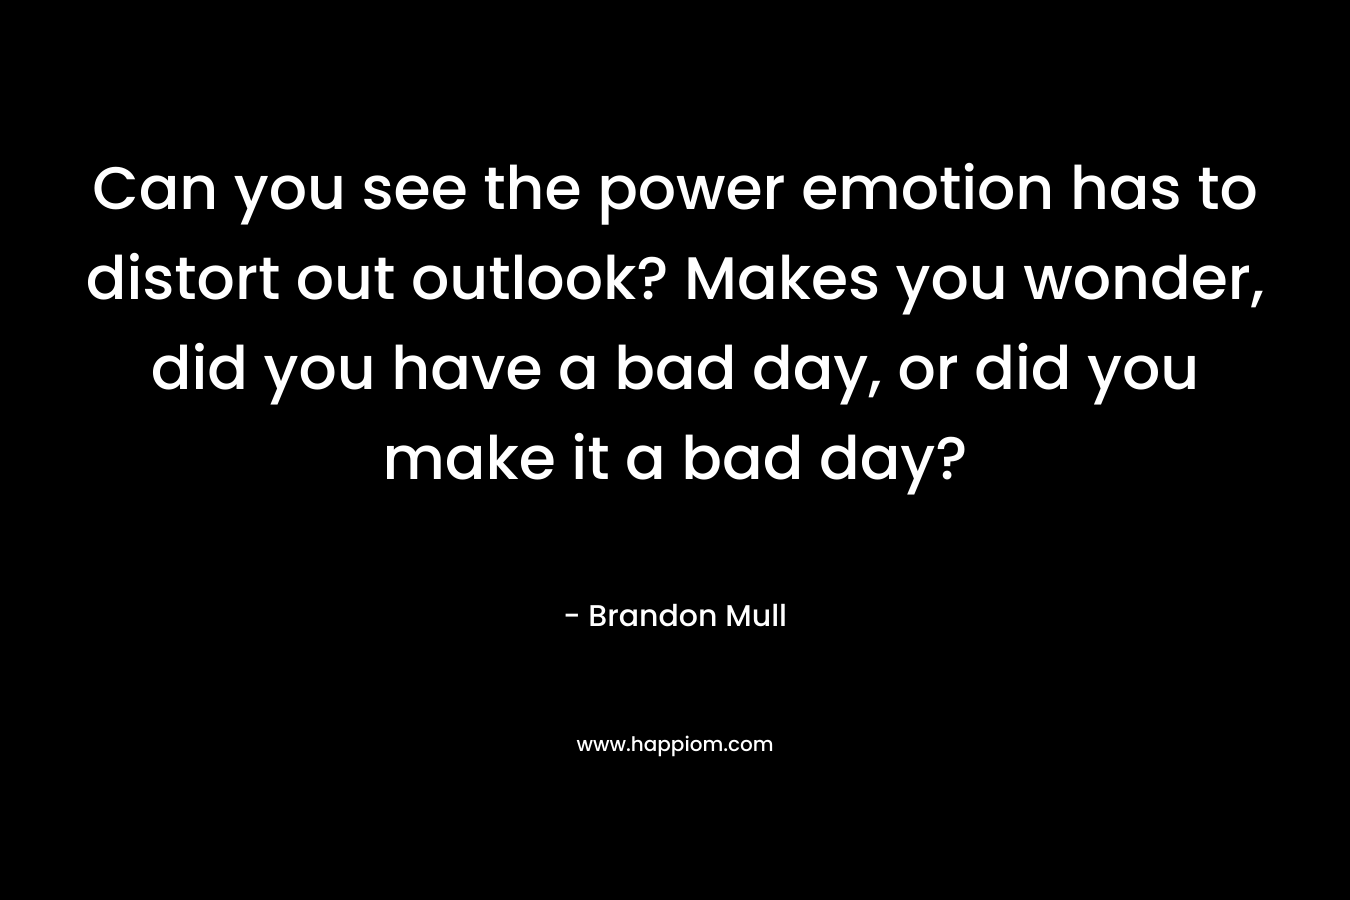 Can you see the power emotion has to distort out outlook? Makes you wonder, did you have a bad day, or did you make it a bad day? – Brandon Mull